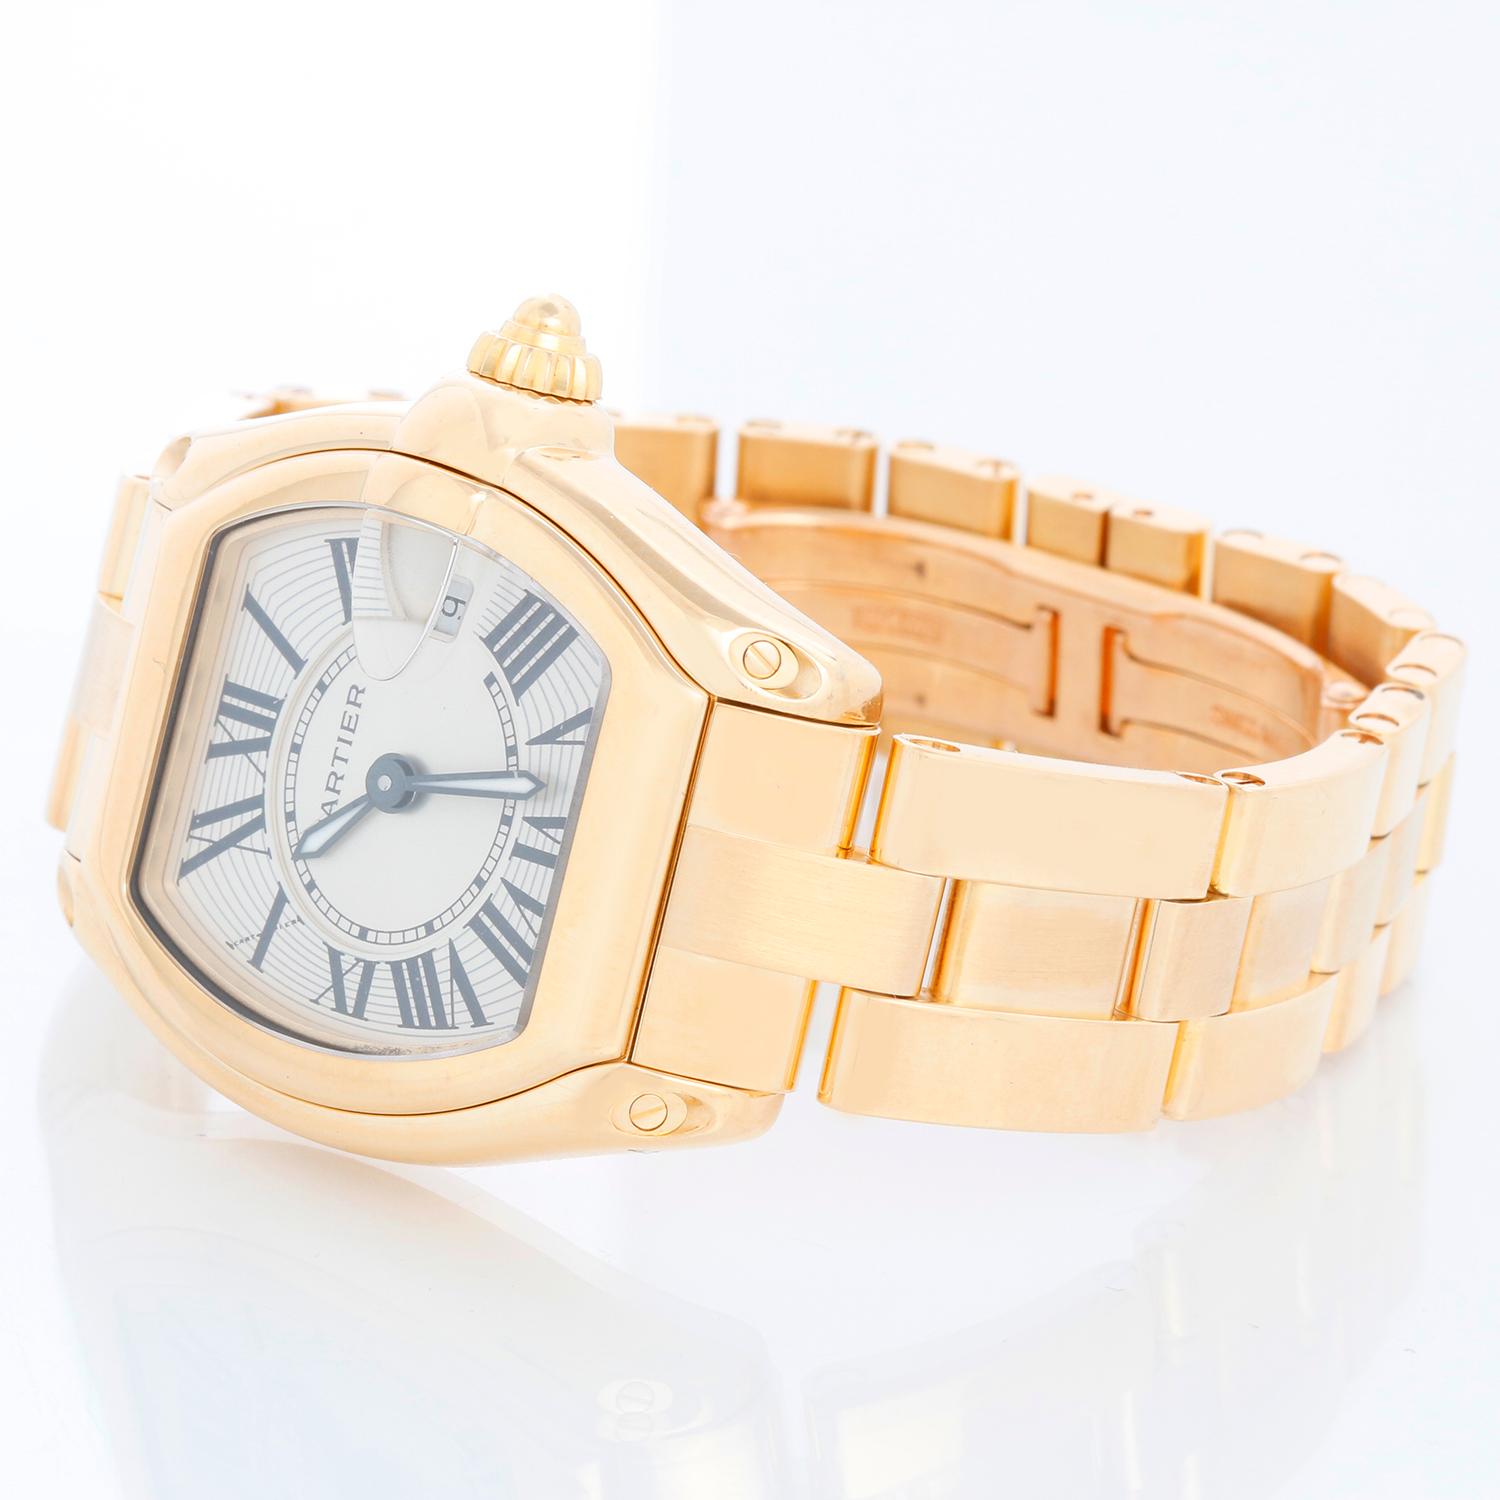 Cartier Roadster 18k Yellow Gold Quartz W620W62018Y18V1 2676 - Quartz. 18k yellow gold tonneau style case (31mm x 37mm). Silver guilloche dial with black Roman numerals; date at 3 o'clock. 18k yellow gold Cartier bracelet with deployant clasp.